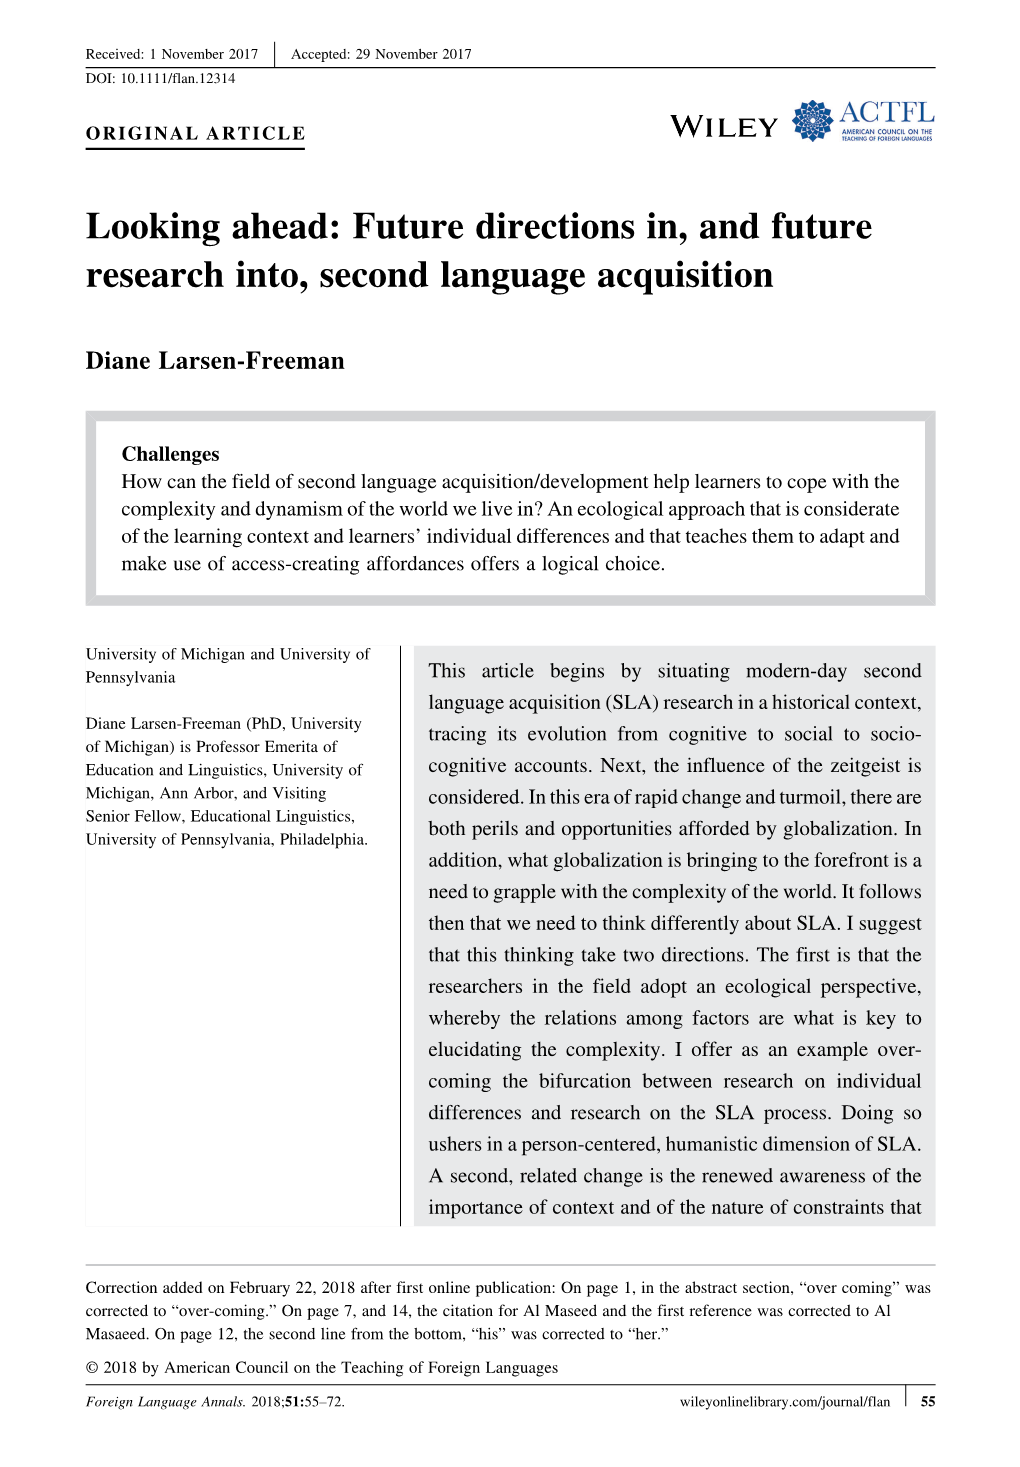 Future Directions In, and Future Research Into, Second Language Acquisition